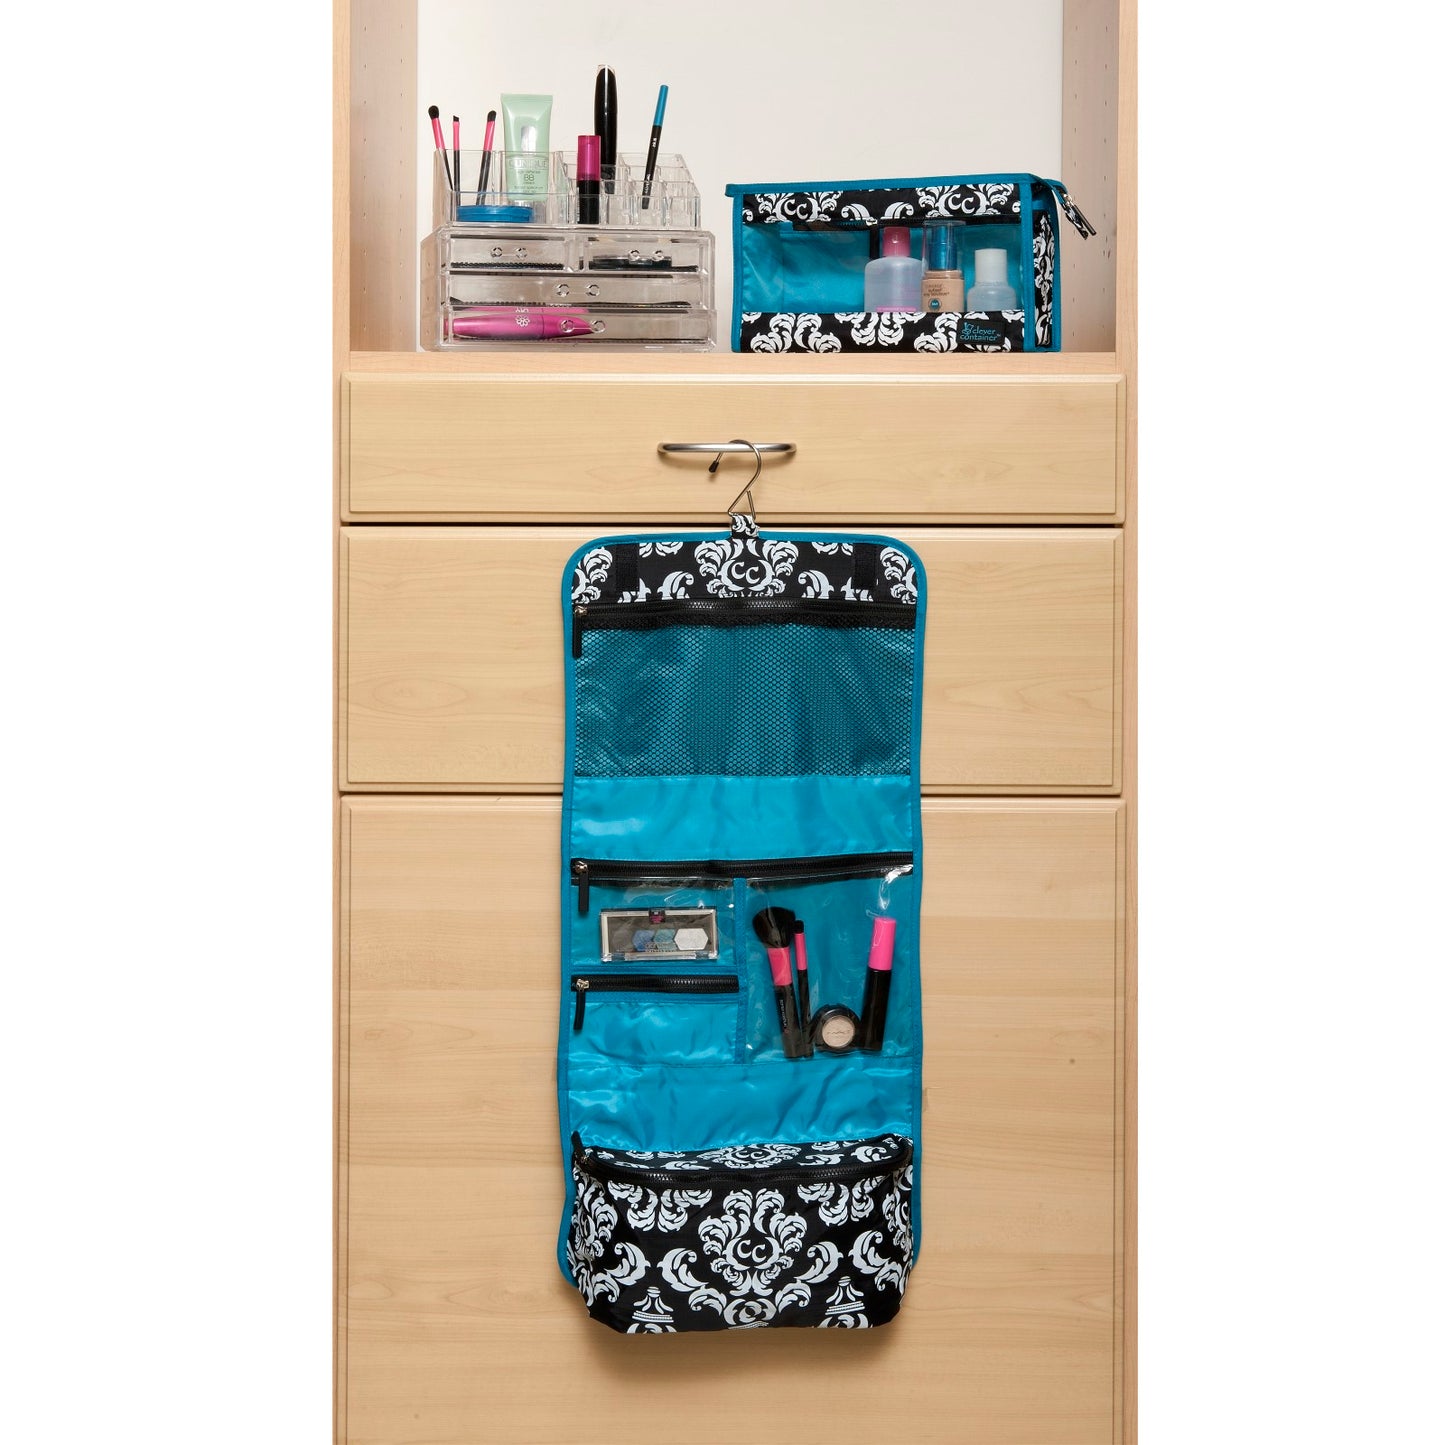 Two-Piece Hanging Travel Set - Damask with Teal